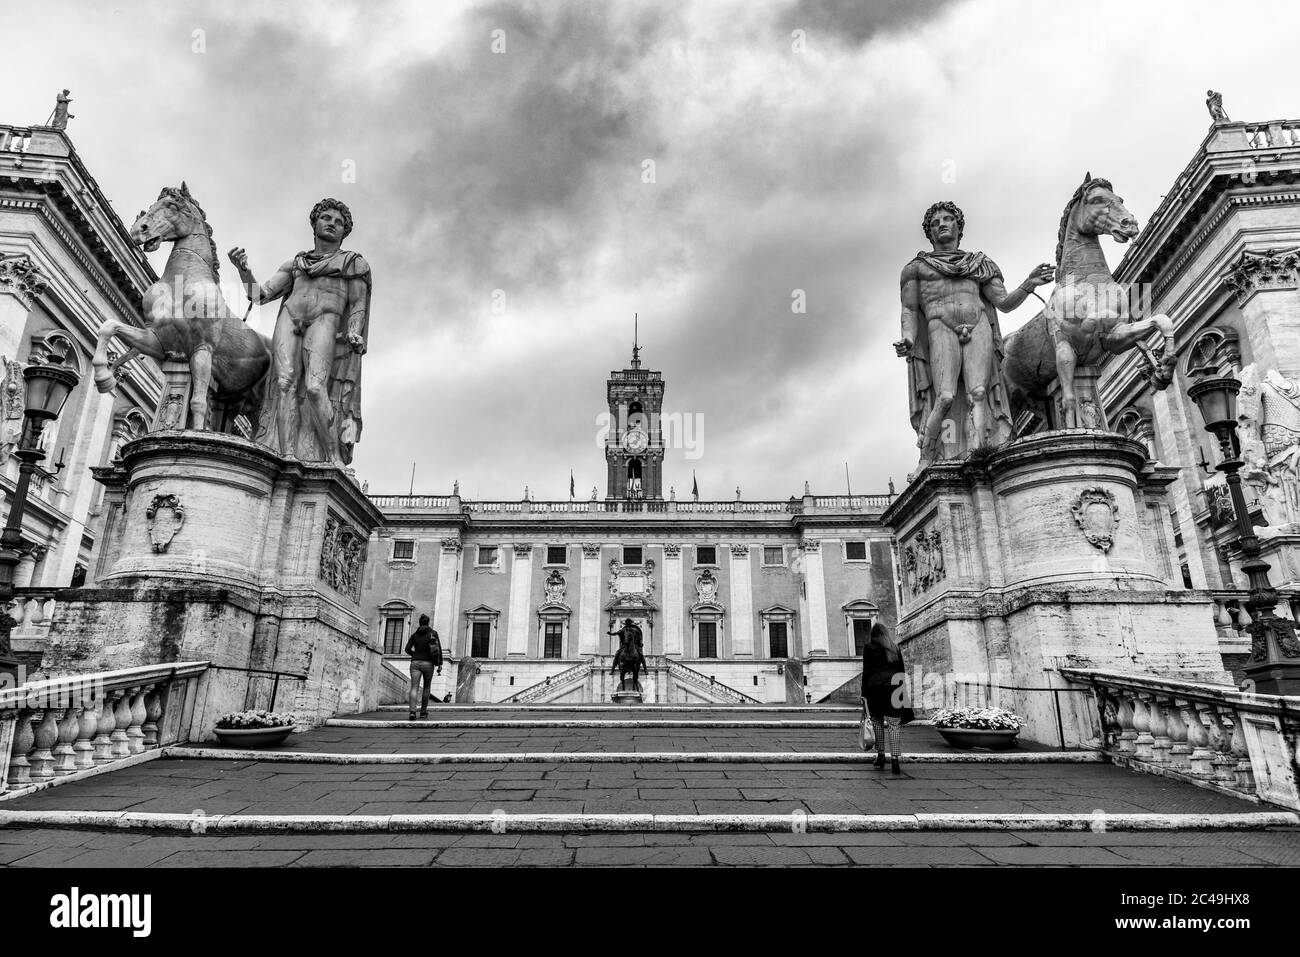 Michelangelo Capitoline Steps to Piazza Campidoglio on Capitoline Hill, Rome, Italy. Black and white image. Stock Photo